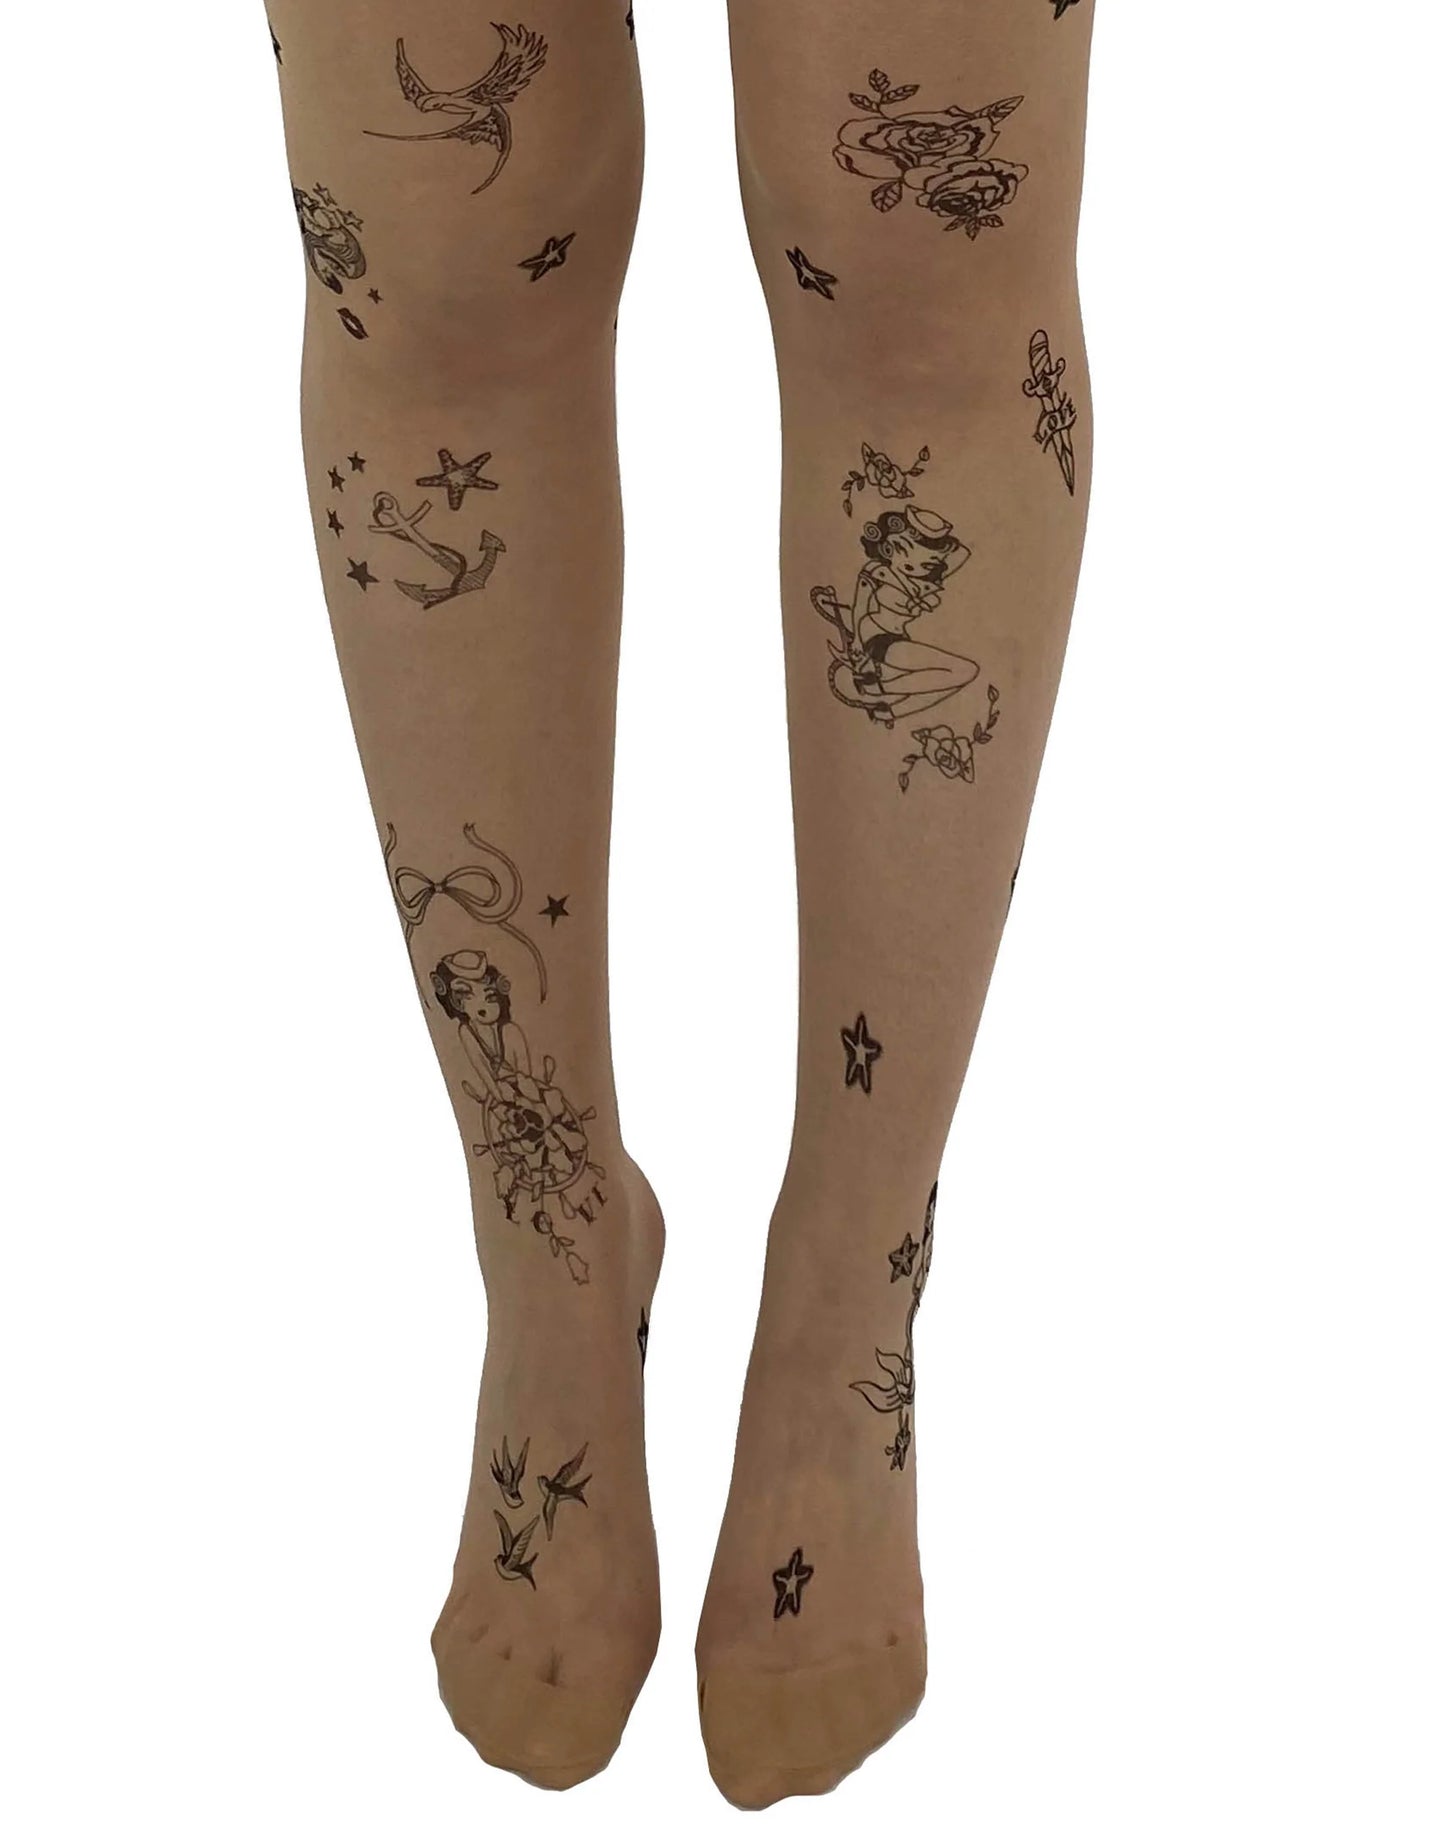 Pamela Mann Tattoo Sailor Girl Tights - nude tights with black nautical tattoo patterned print